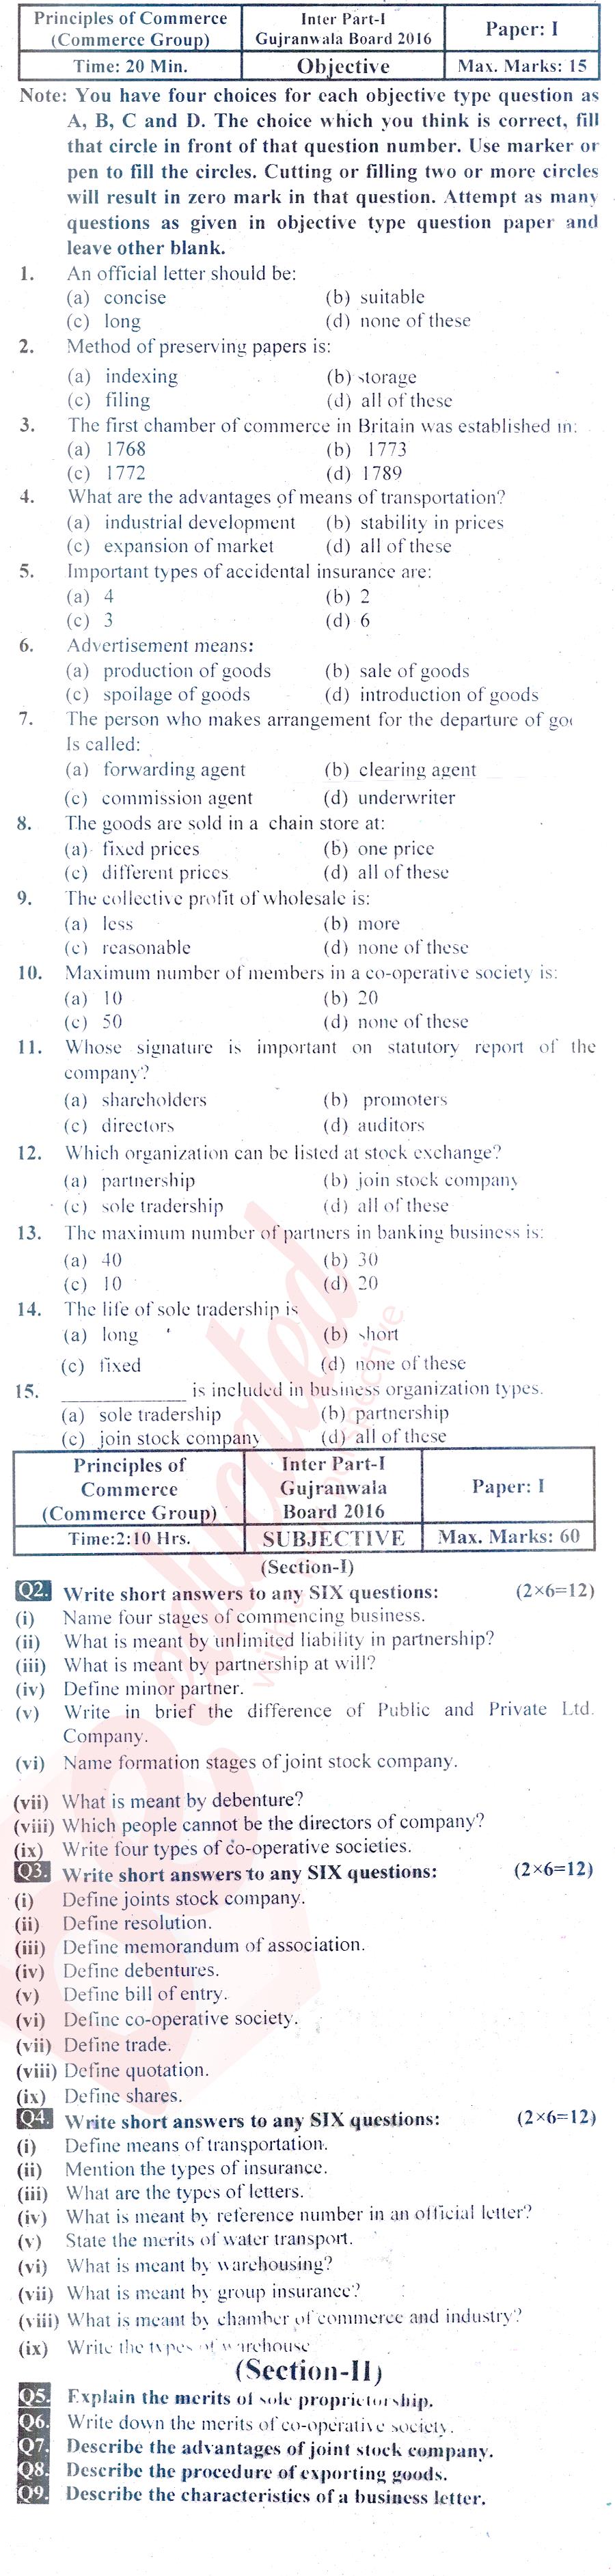 Principles of Commerce ICOM Part 1 Past Paper Group 1 BISE Gujranwala 2016